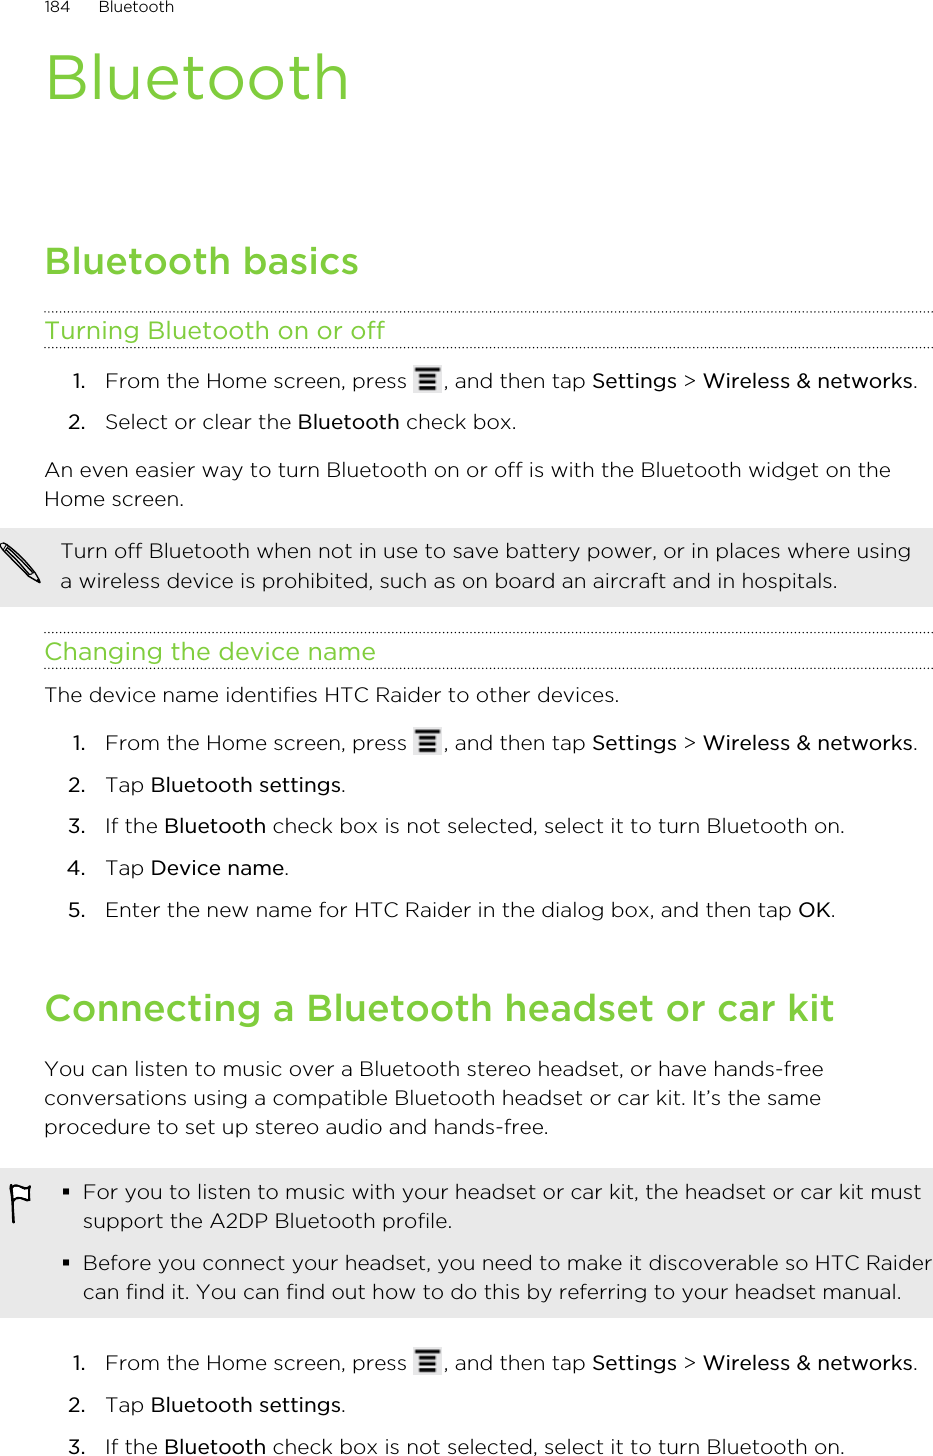 BluetoothBluetooth basicsTurning Bluetooth on or off1. From the Home screen, press  , and then tap Settings &gt; Wireless &amp; networks.2. Select or clear the Bluetooth check box.An even easier way to turn Bluetooth on or off is with the Bluetooth widget on theHome screen.Turn off Bluetooth when not in use to save battery power, or in places where usinga wireless device is prohibited, such as on board an aircraft and in hospitals.Changing the device nameThe device name identifies HTC Raider to other devices.1. From the Home screen, press  , and then tap Settings &gt; Wireless &amp; networks.2. Tap Bluetooth settings.3. If the Bluetooth check box is not selected, select it to turn Bluetooth on.4. Tap Device name.5. Enter the new name for HTC Raider in the dialog box, and then tap OK.Connecting a Bluetooth headset or car kitYou can listen to music over a Bluetooth stereo headset, or have hands-freeconversations using a compatible Bluetooth headset or car kit. It’s the sameprocedure to set up stereo audio and hands-free.§For you to listen to music with your headset or car kit, the headset or car kit mustsupport the A2DP Bluetooth profile.§Before you connect your headset, you need to make it discoverable so HTC Raidercan find it. You can find out how to do this by referring to your headset manual.1. From the Home screen, press  , and then tap Settings &gt; Wireless &amp; networks.2. Tap Bluetooth settings.3. If the Bluetooth check box is not selected, select it to turn Bluetooth on.184 Bluetooth